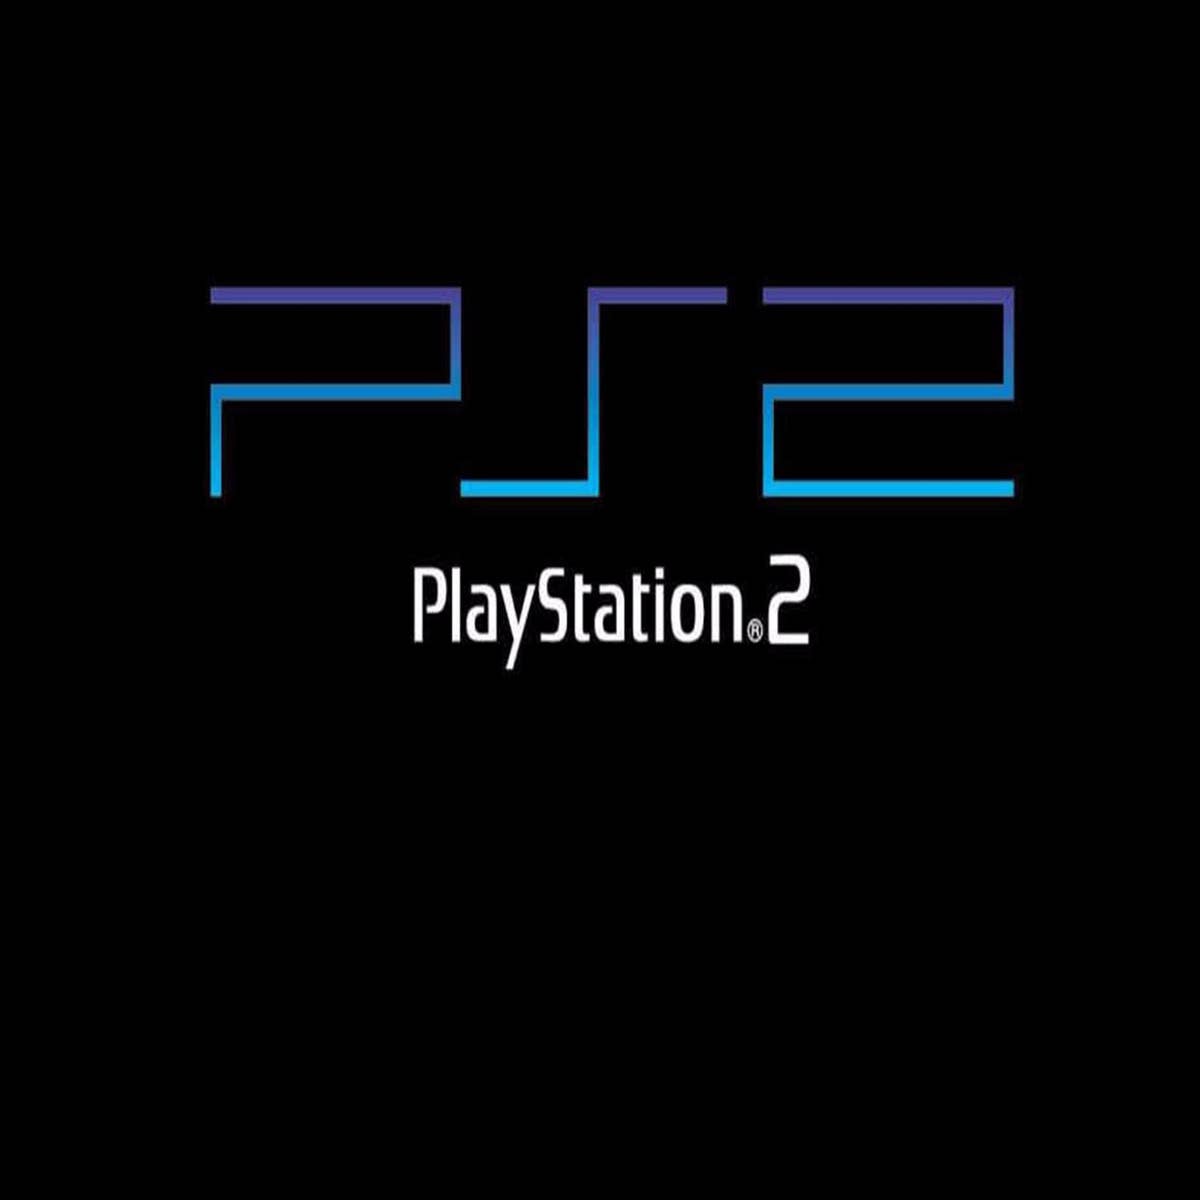 PLAYING PLAYSTATION 2 GAMES USING NETWORK SHARE